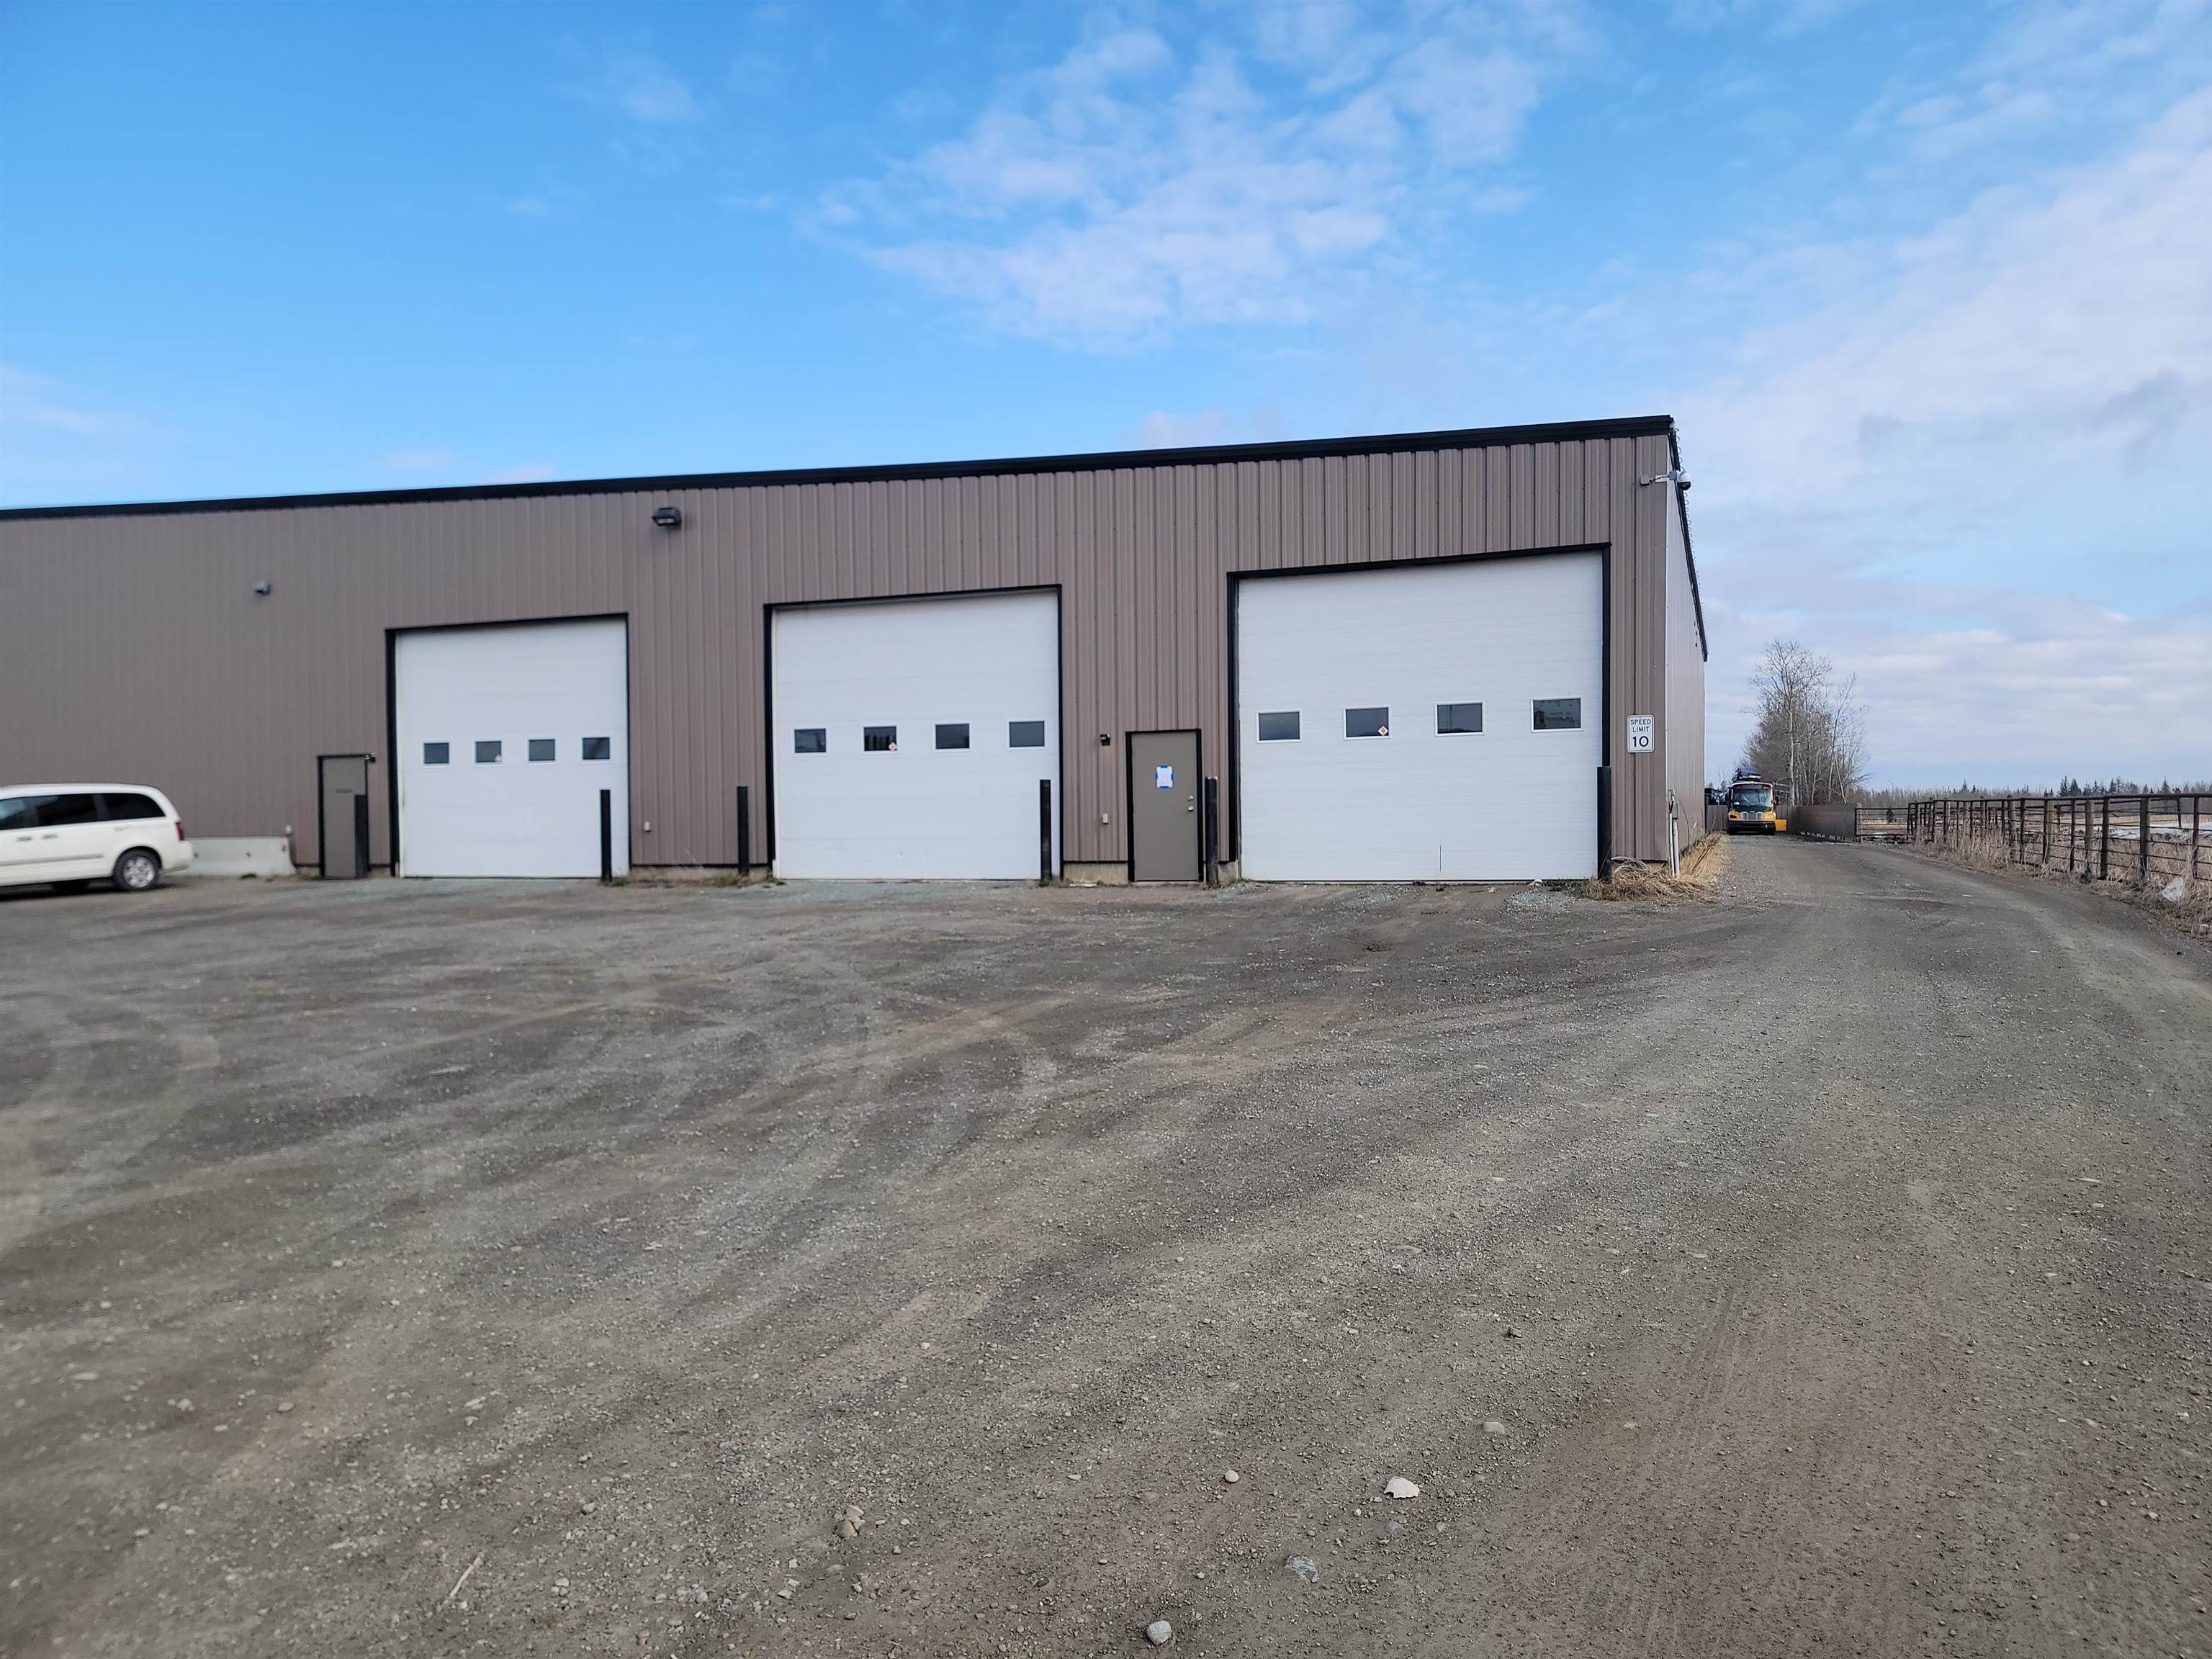 Main Photo: 1780 BOUNDARY Road in Prince George: Airport Industrial for lease (PG City South East)  : MLS®# C8055617